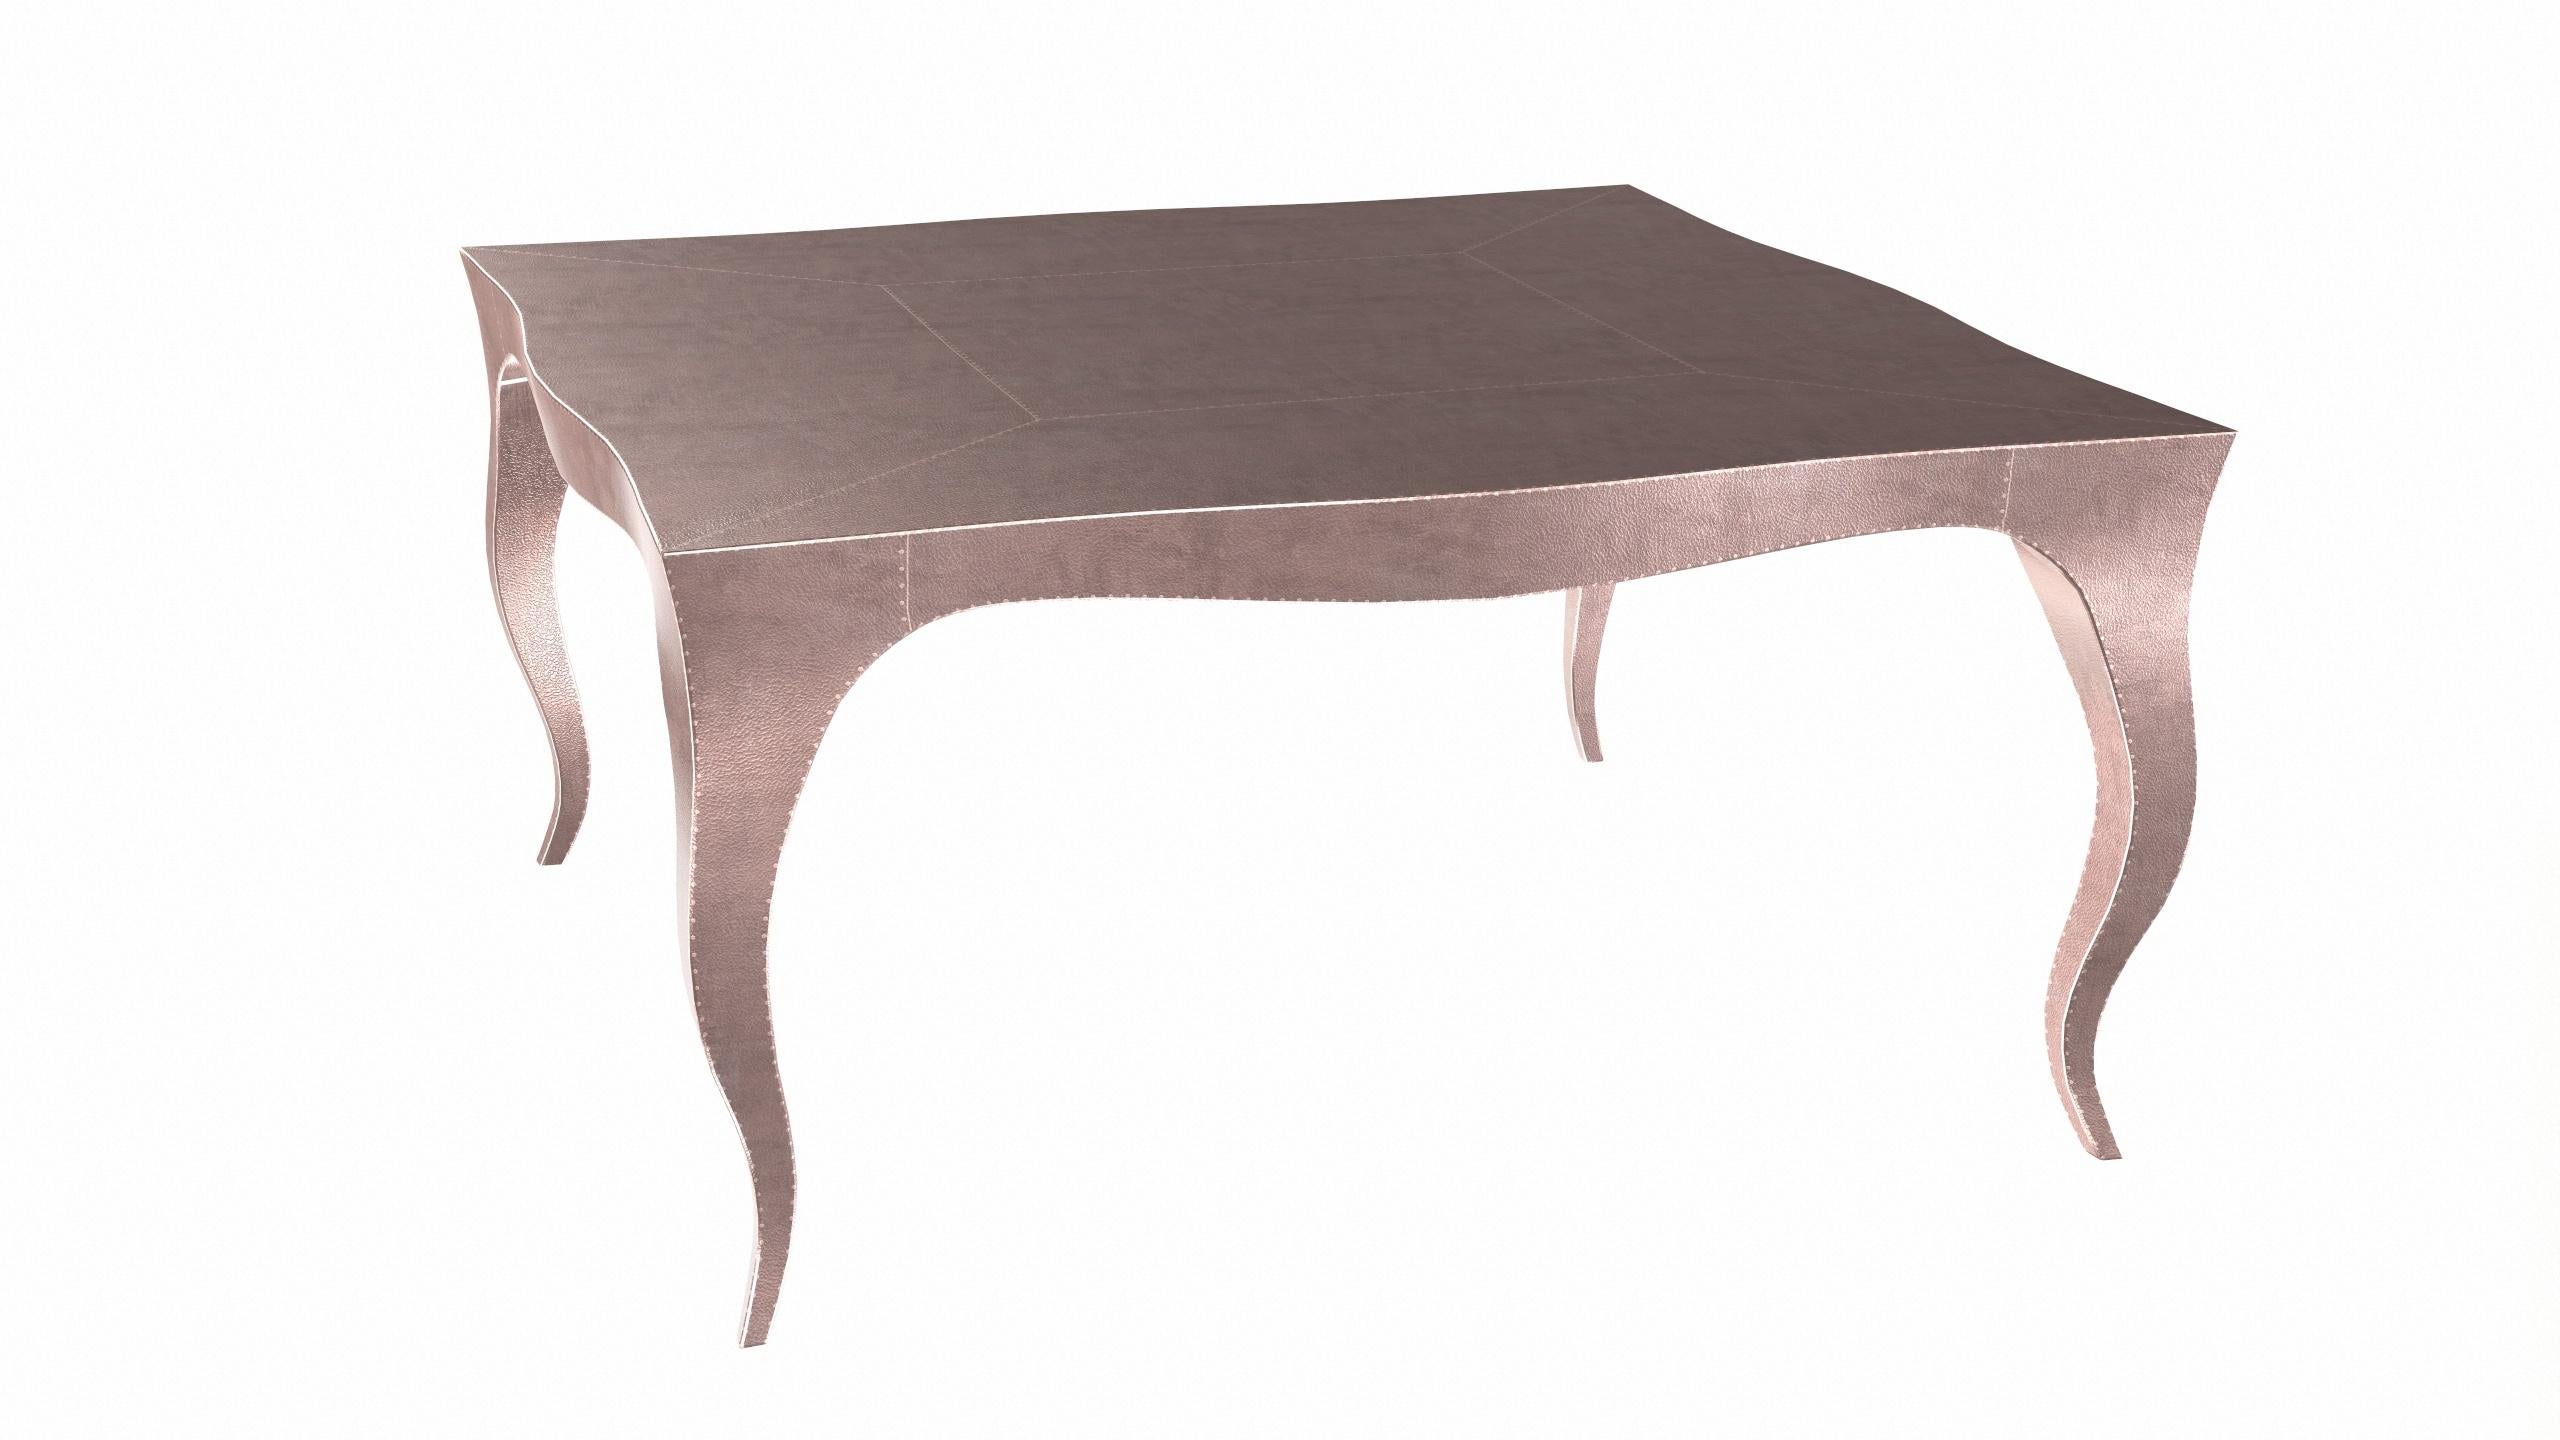 Metal Louise Art Deco Card Tables and Tea Tables Fine Hammered Copper by Paul Mathieu For Sale